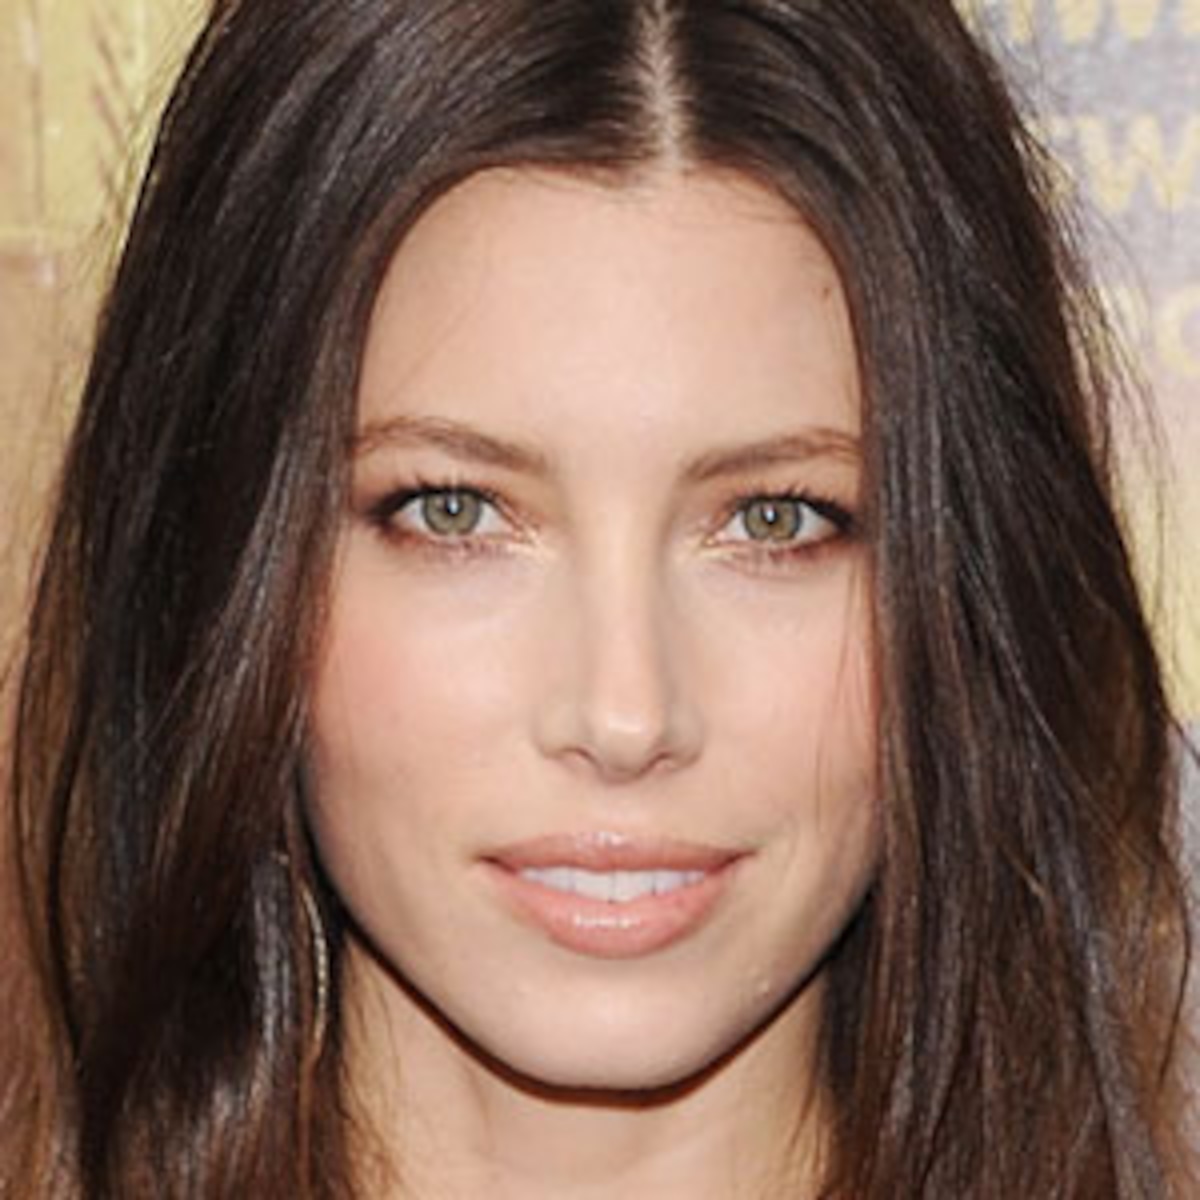 of the Jessica Biel's There New Year's Eve Makeup - E! Online - CA